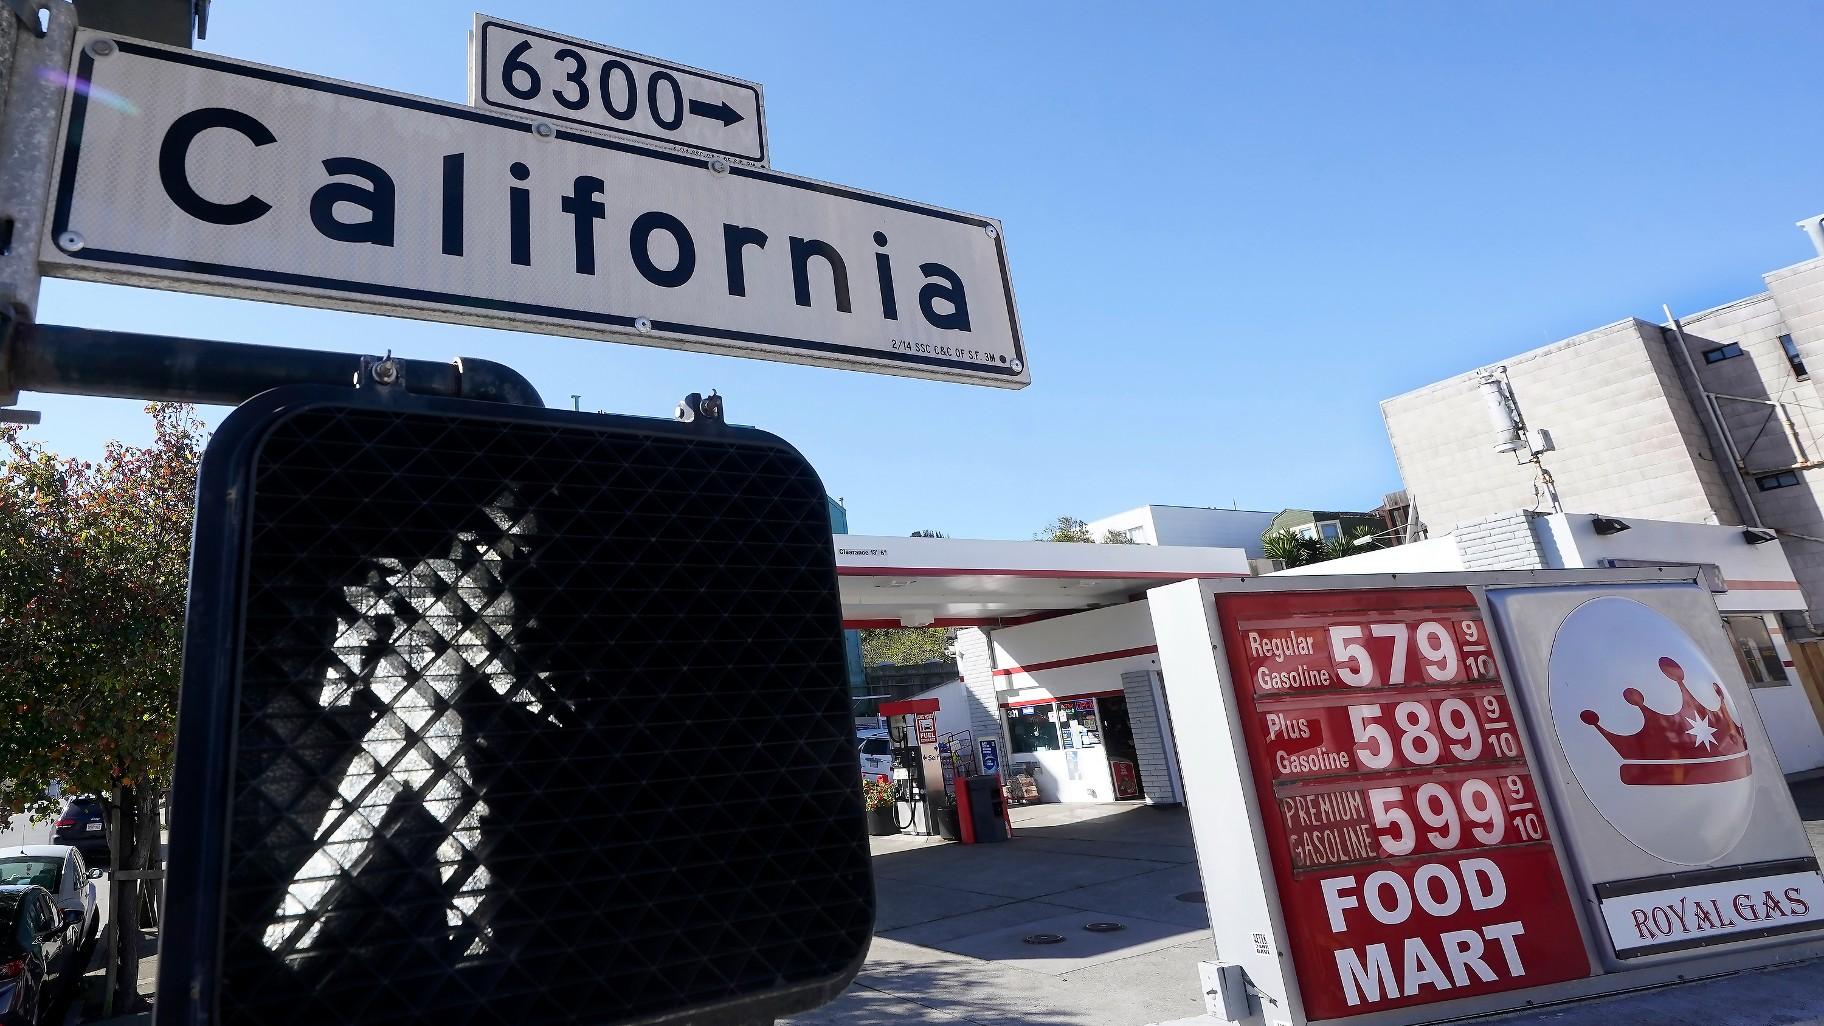 A California street sign is shown next to the price board at a gas station in San Francisco, on March 7, 2022. (AP Photo / Jeff Chiu, File)